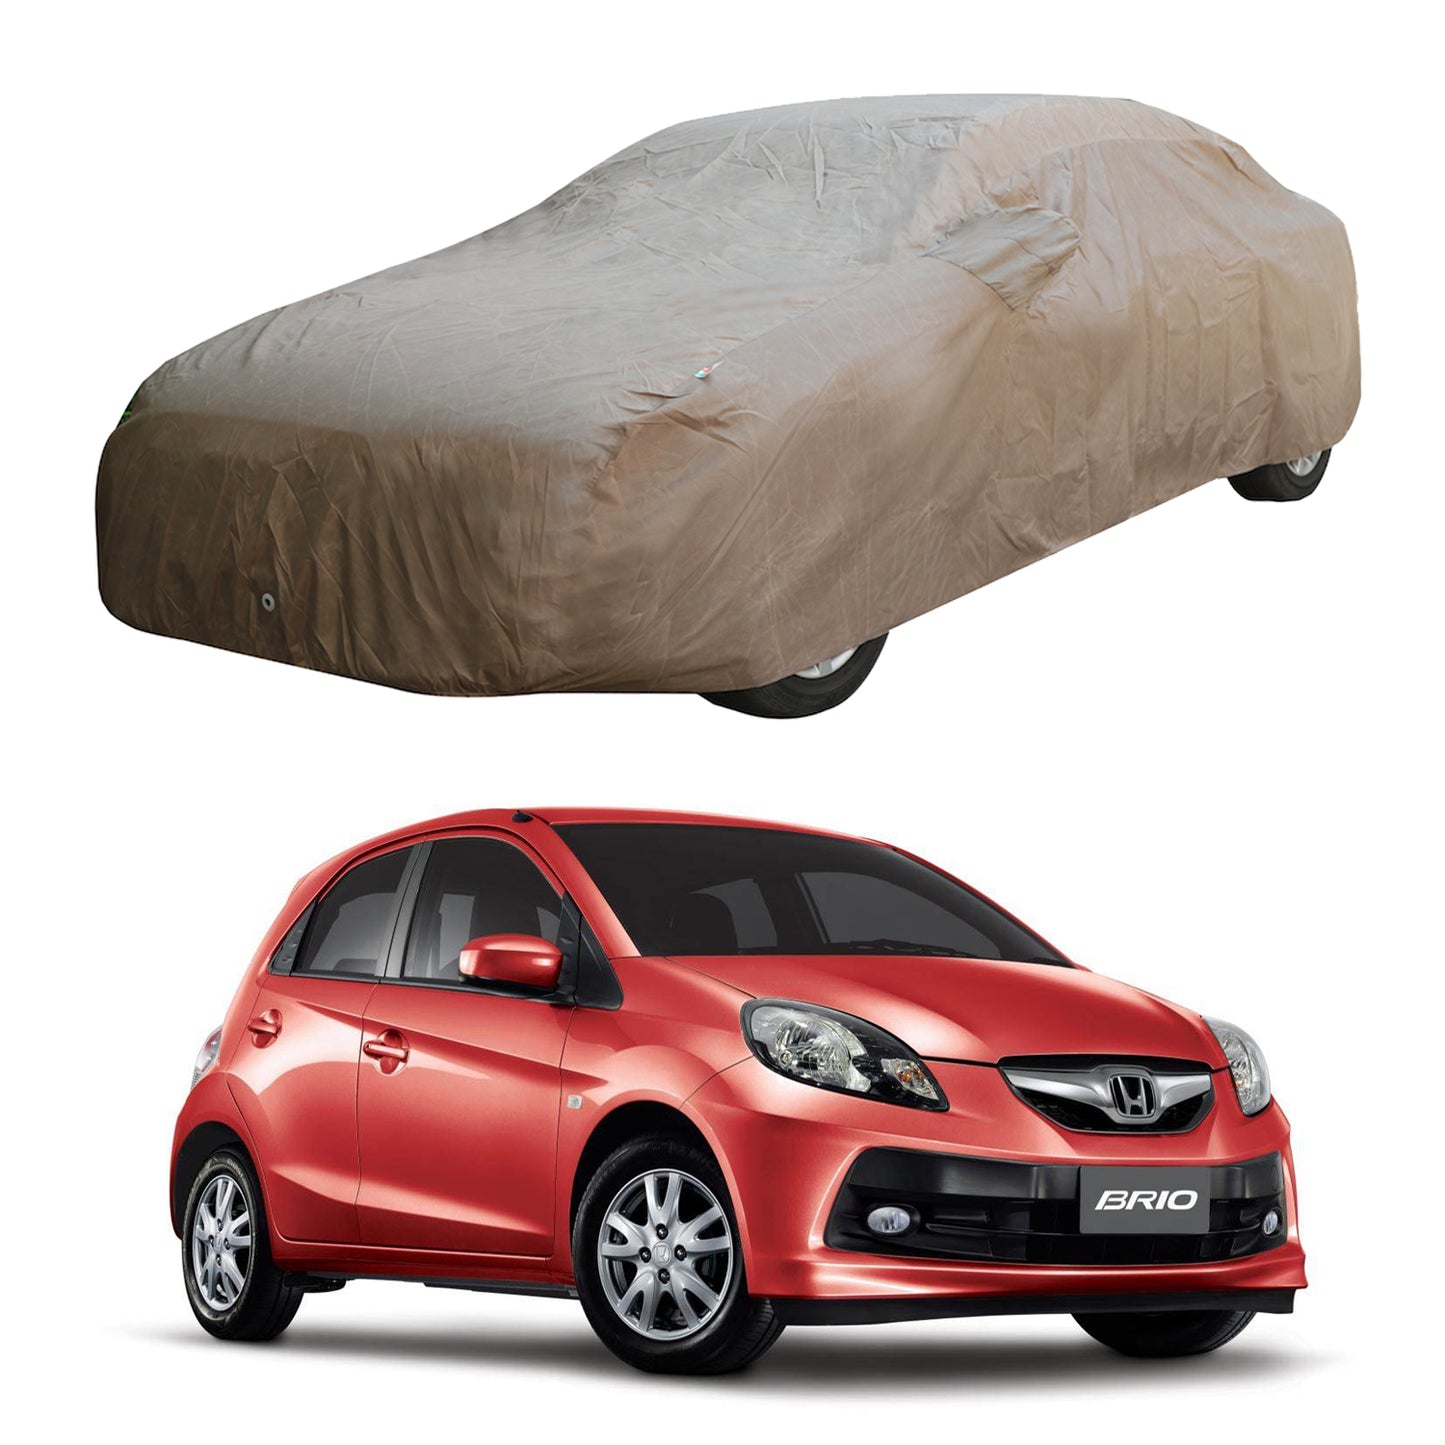 Oshotto Brown 100% Waterproof Car Body Cover with Mirror Pockets For Honda Brio